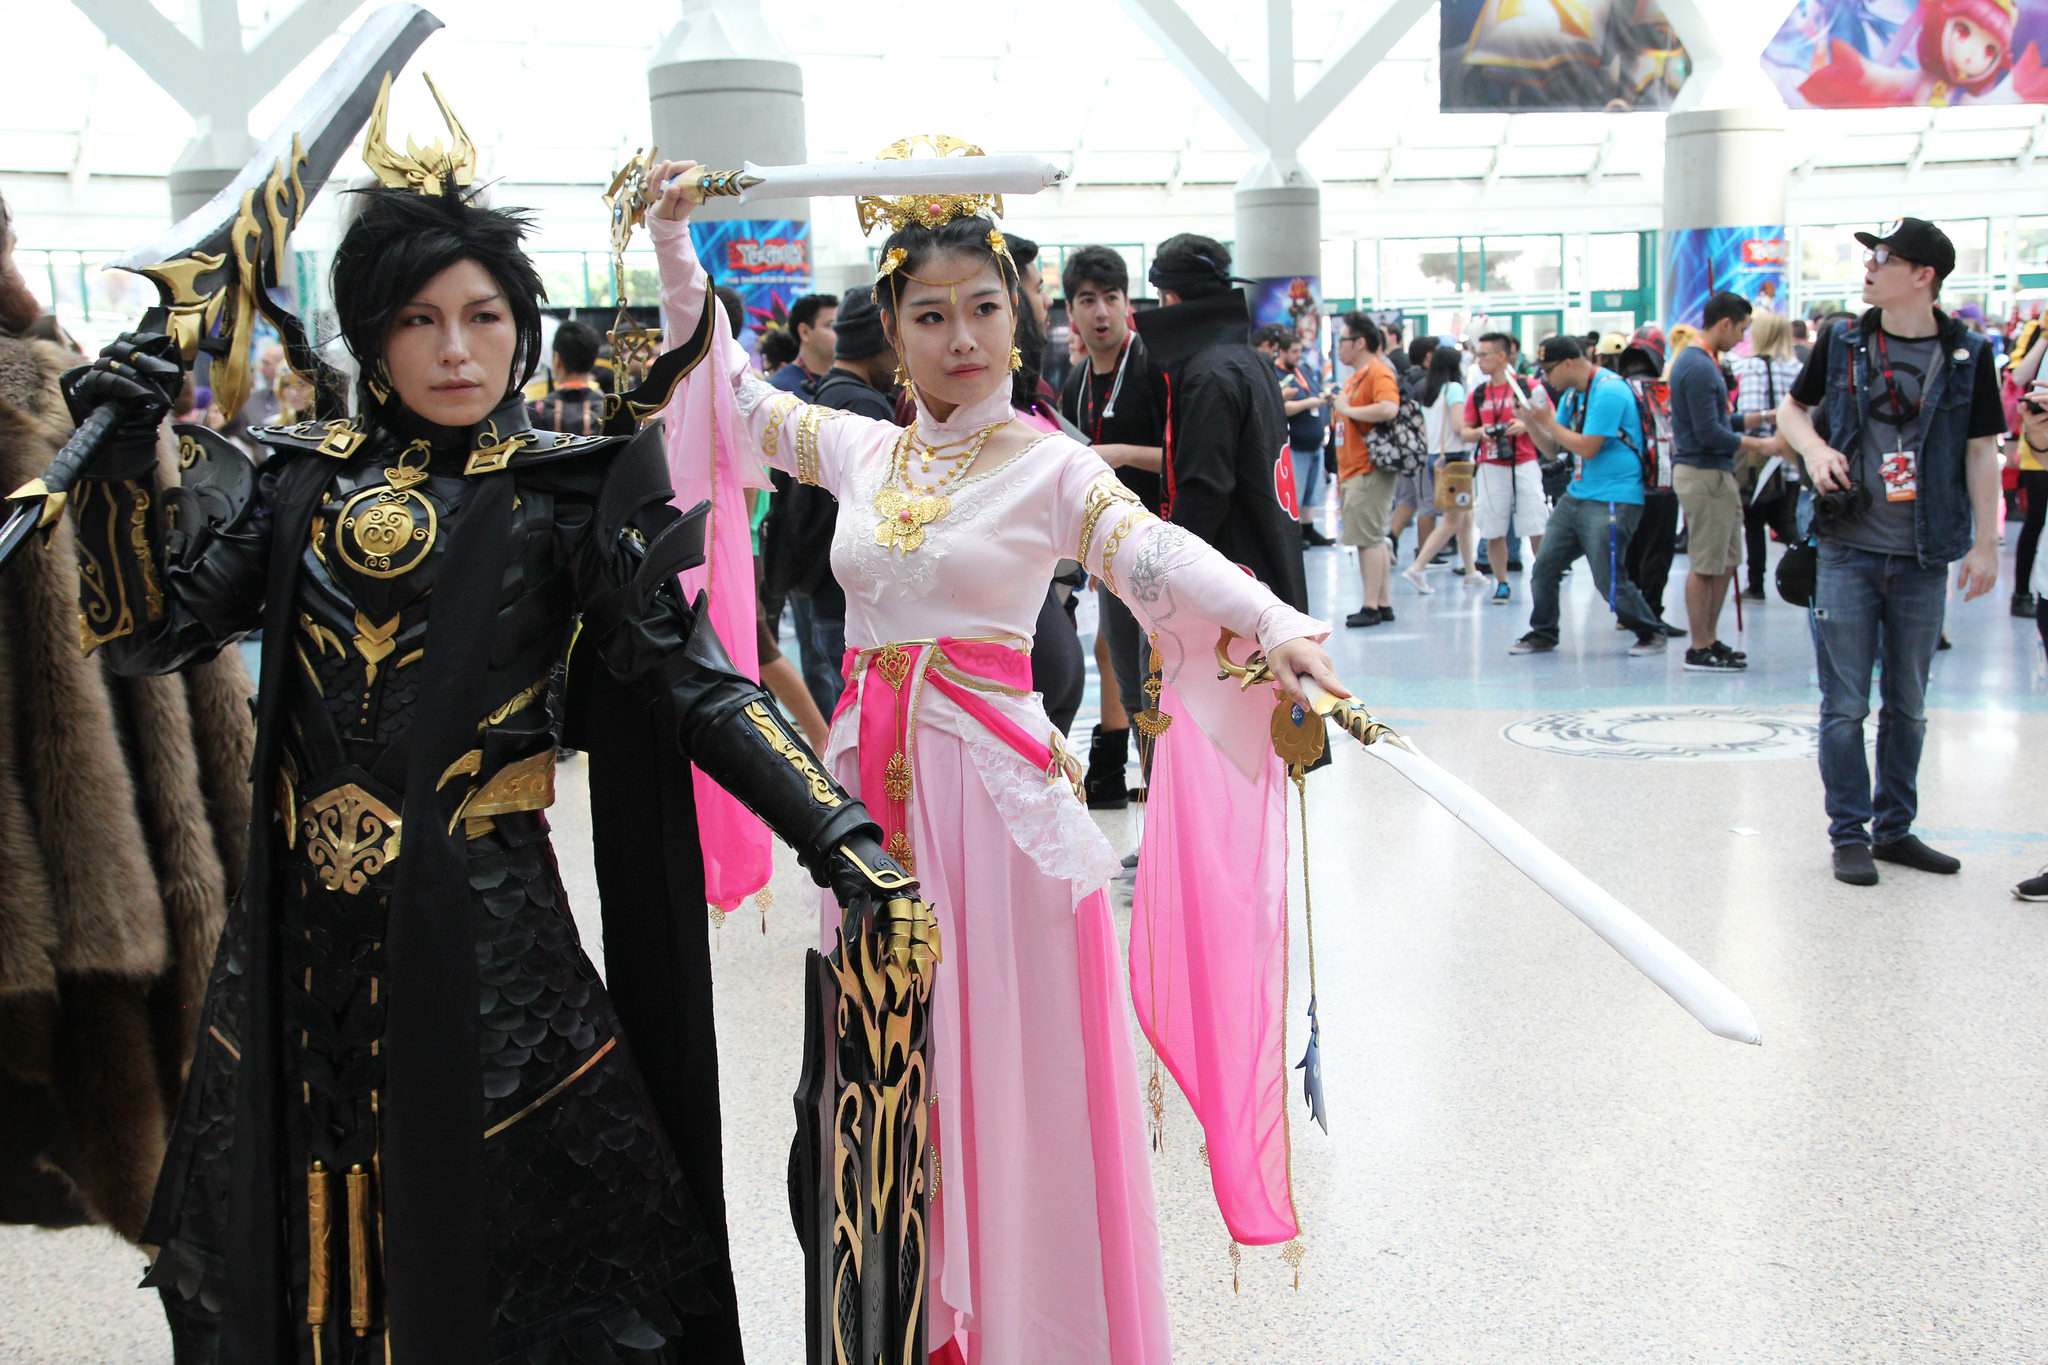 ax2016 Anime Expo 2016 in Los Angeles Convention Center